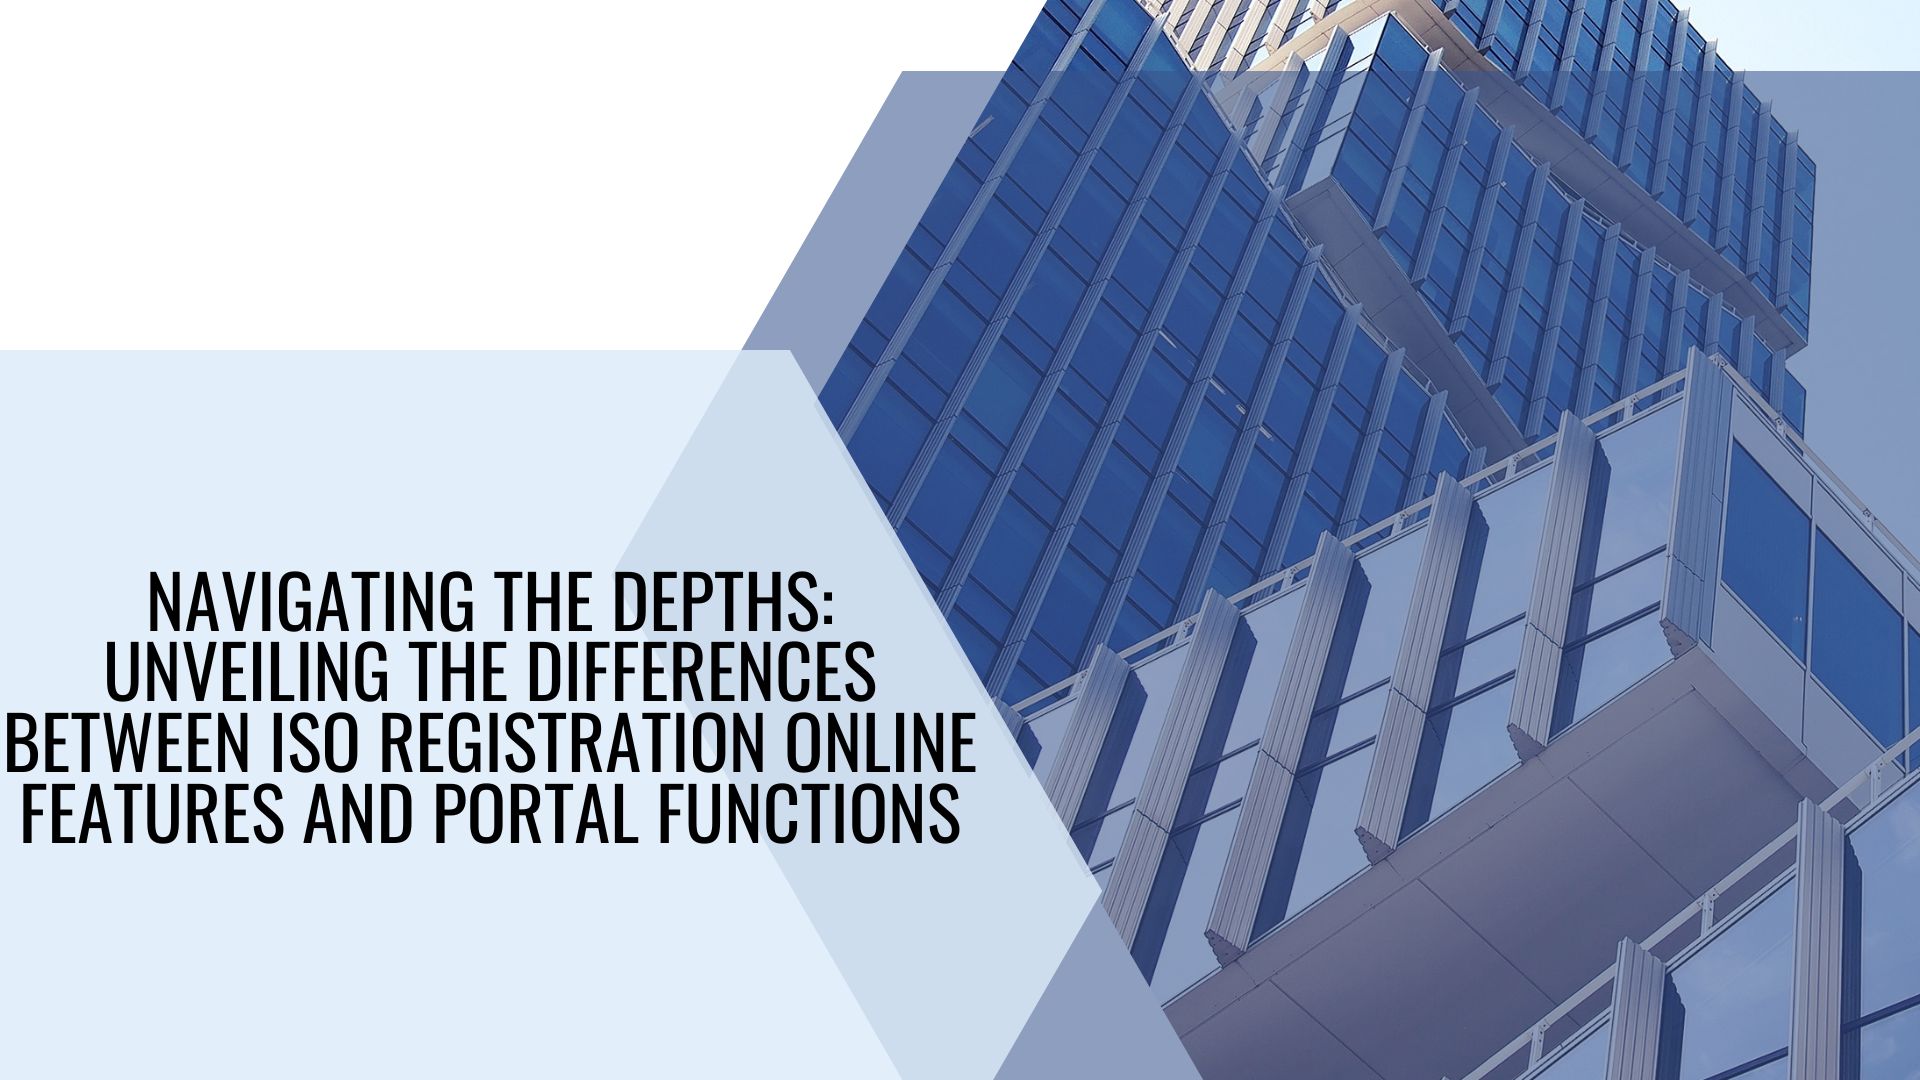 Navigating the Depths: Unveiling the Differences Between ISO Registration Online Features and Portal Functions